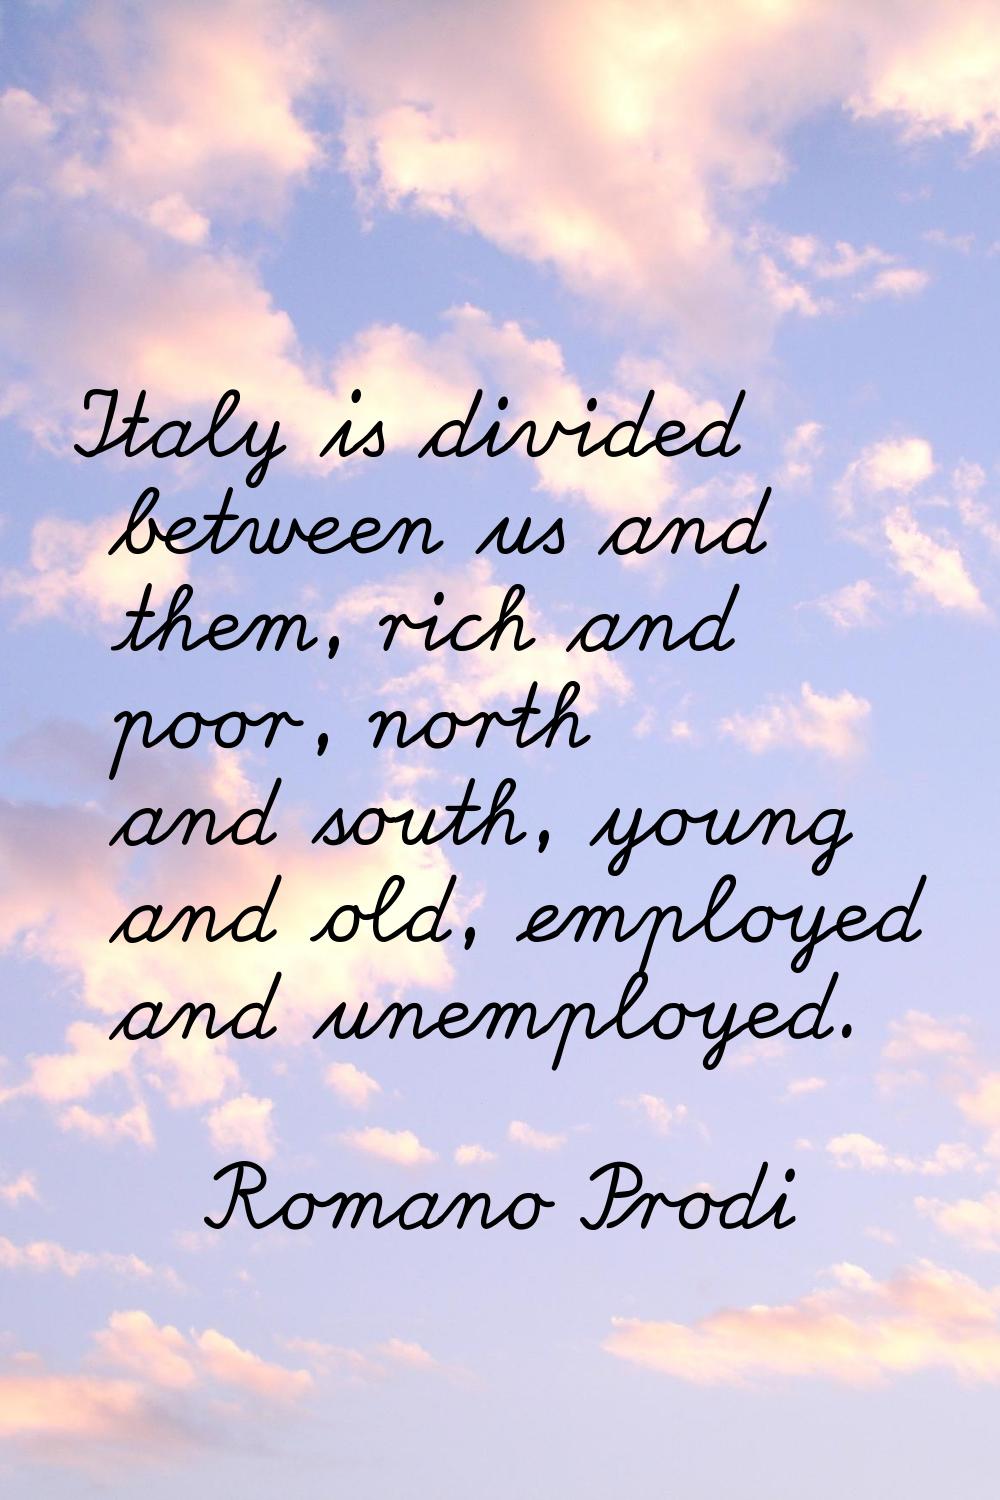 Italy is divided between us and them, rich and poor, north and south, young and old, employed and u